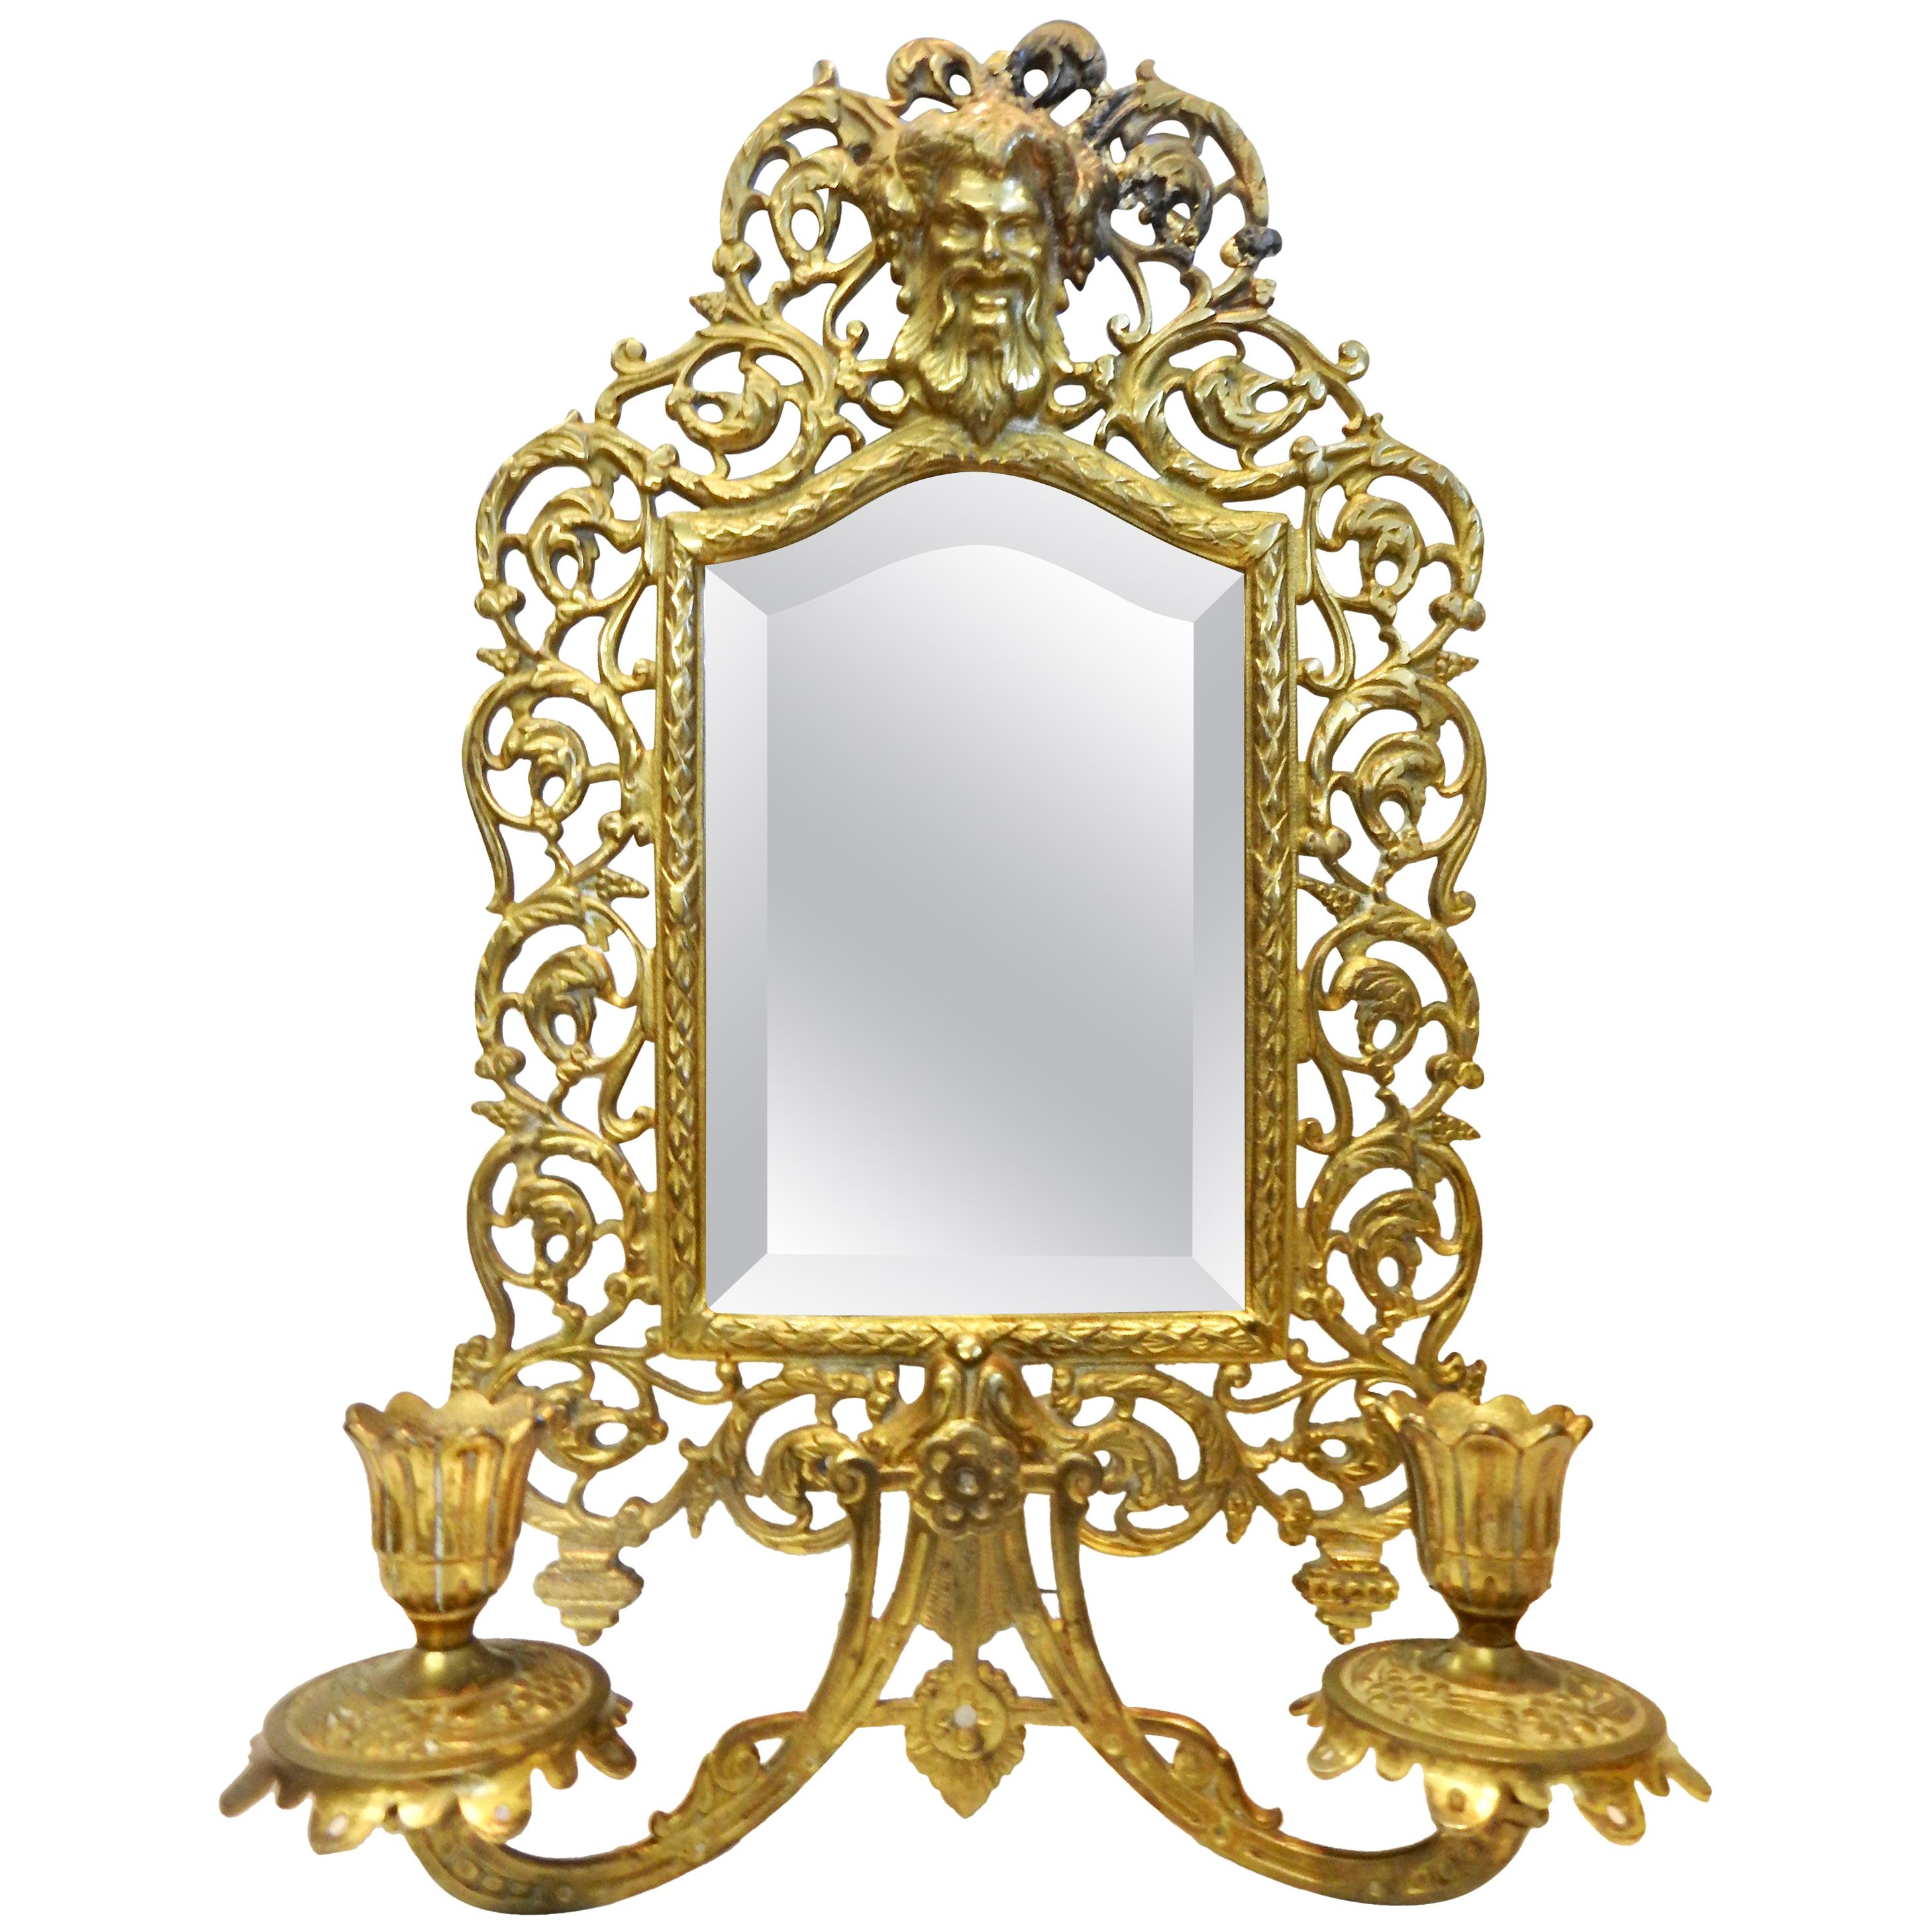 Bradley & Hubbard Co. Brass Beveled Mirror with Sconces, 20th Century For Sale